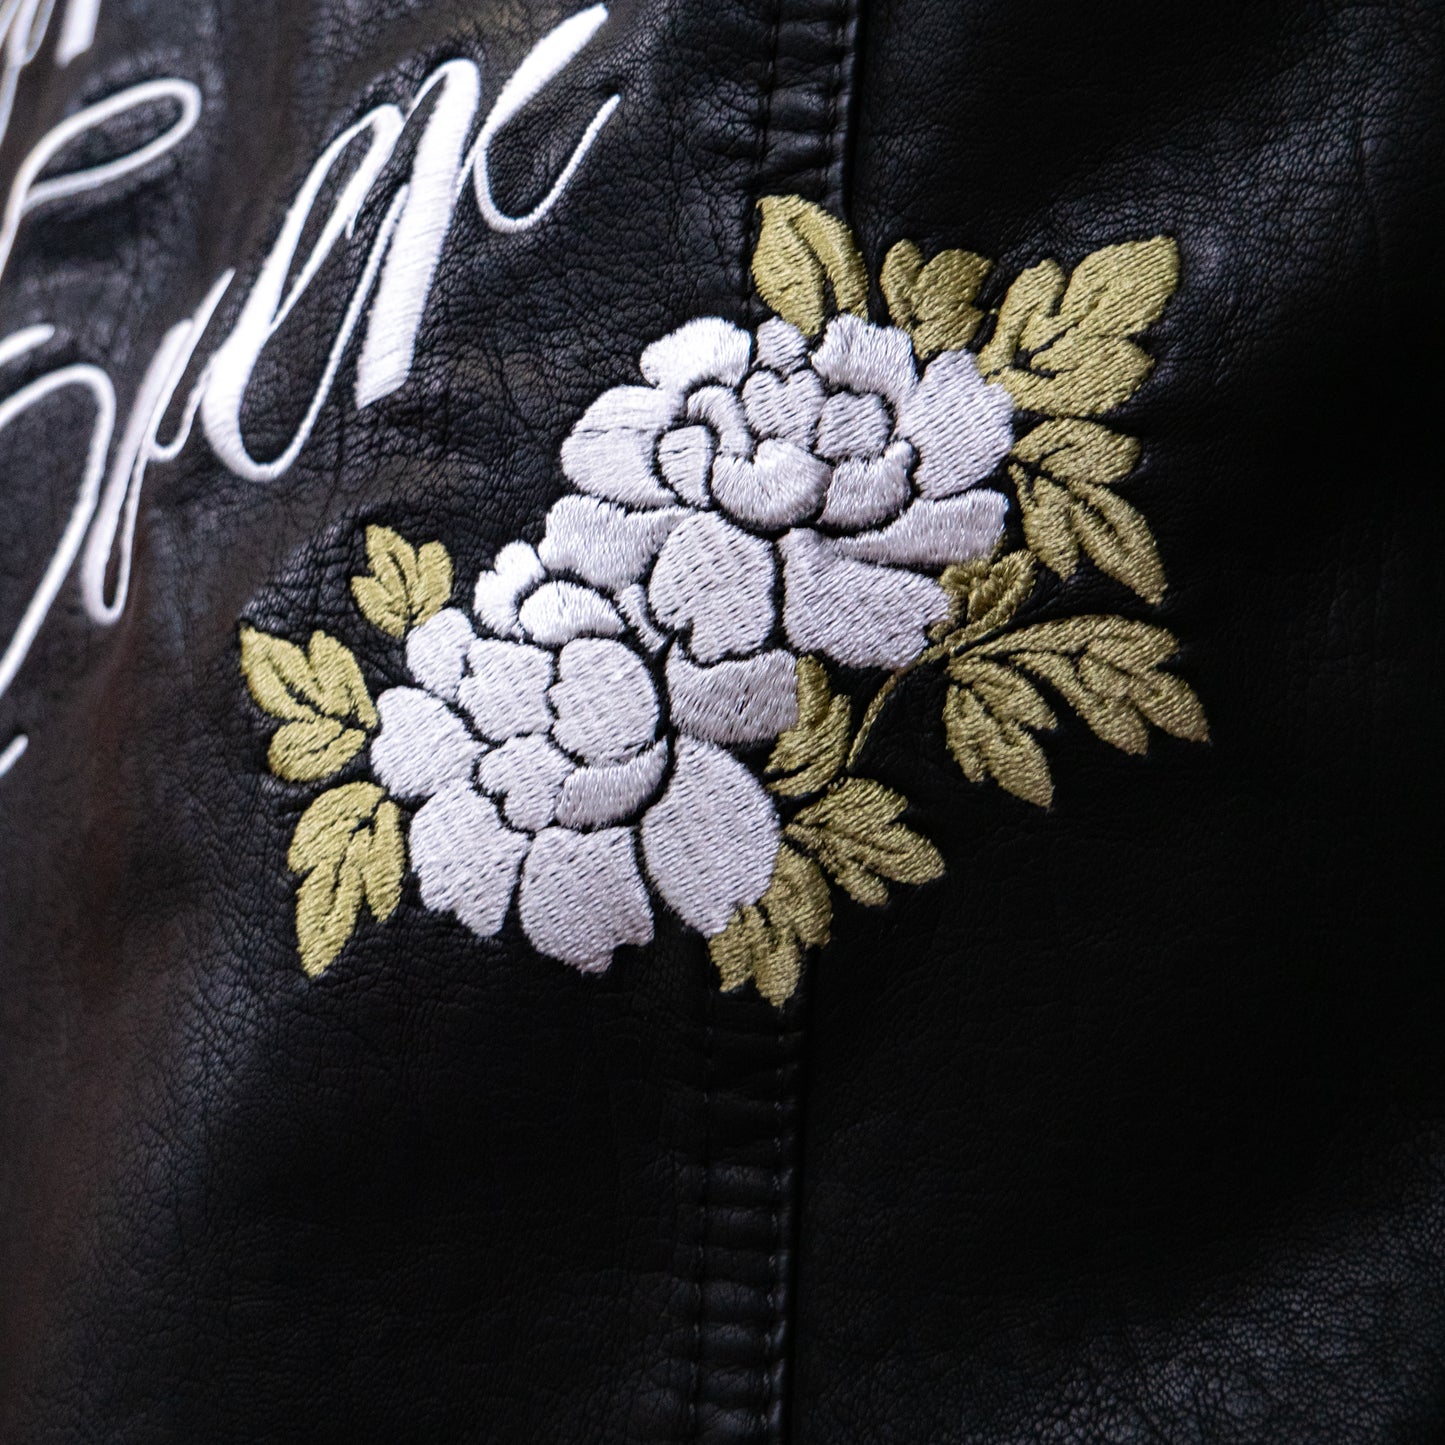 Bridal jacket with Motto charm – a perfect blend of simplicity and style for the bride seeking understated elegance